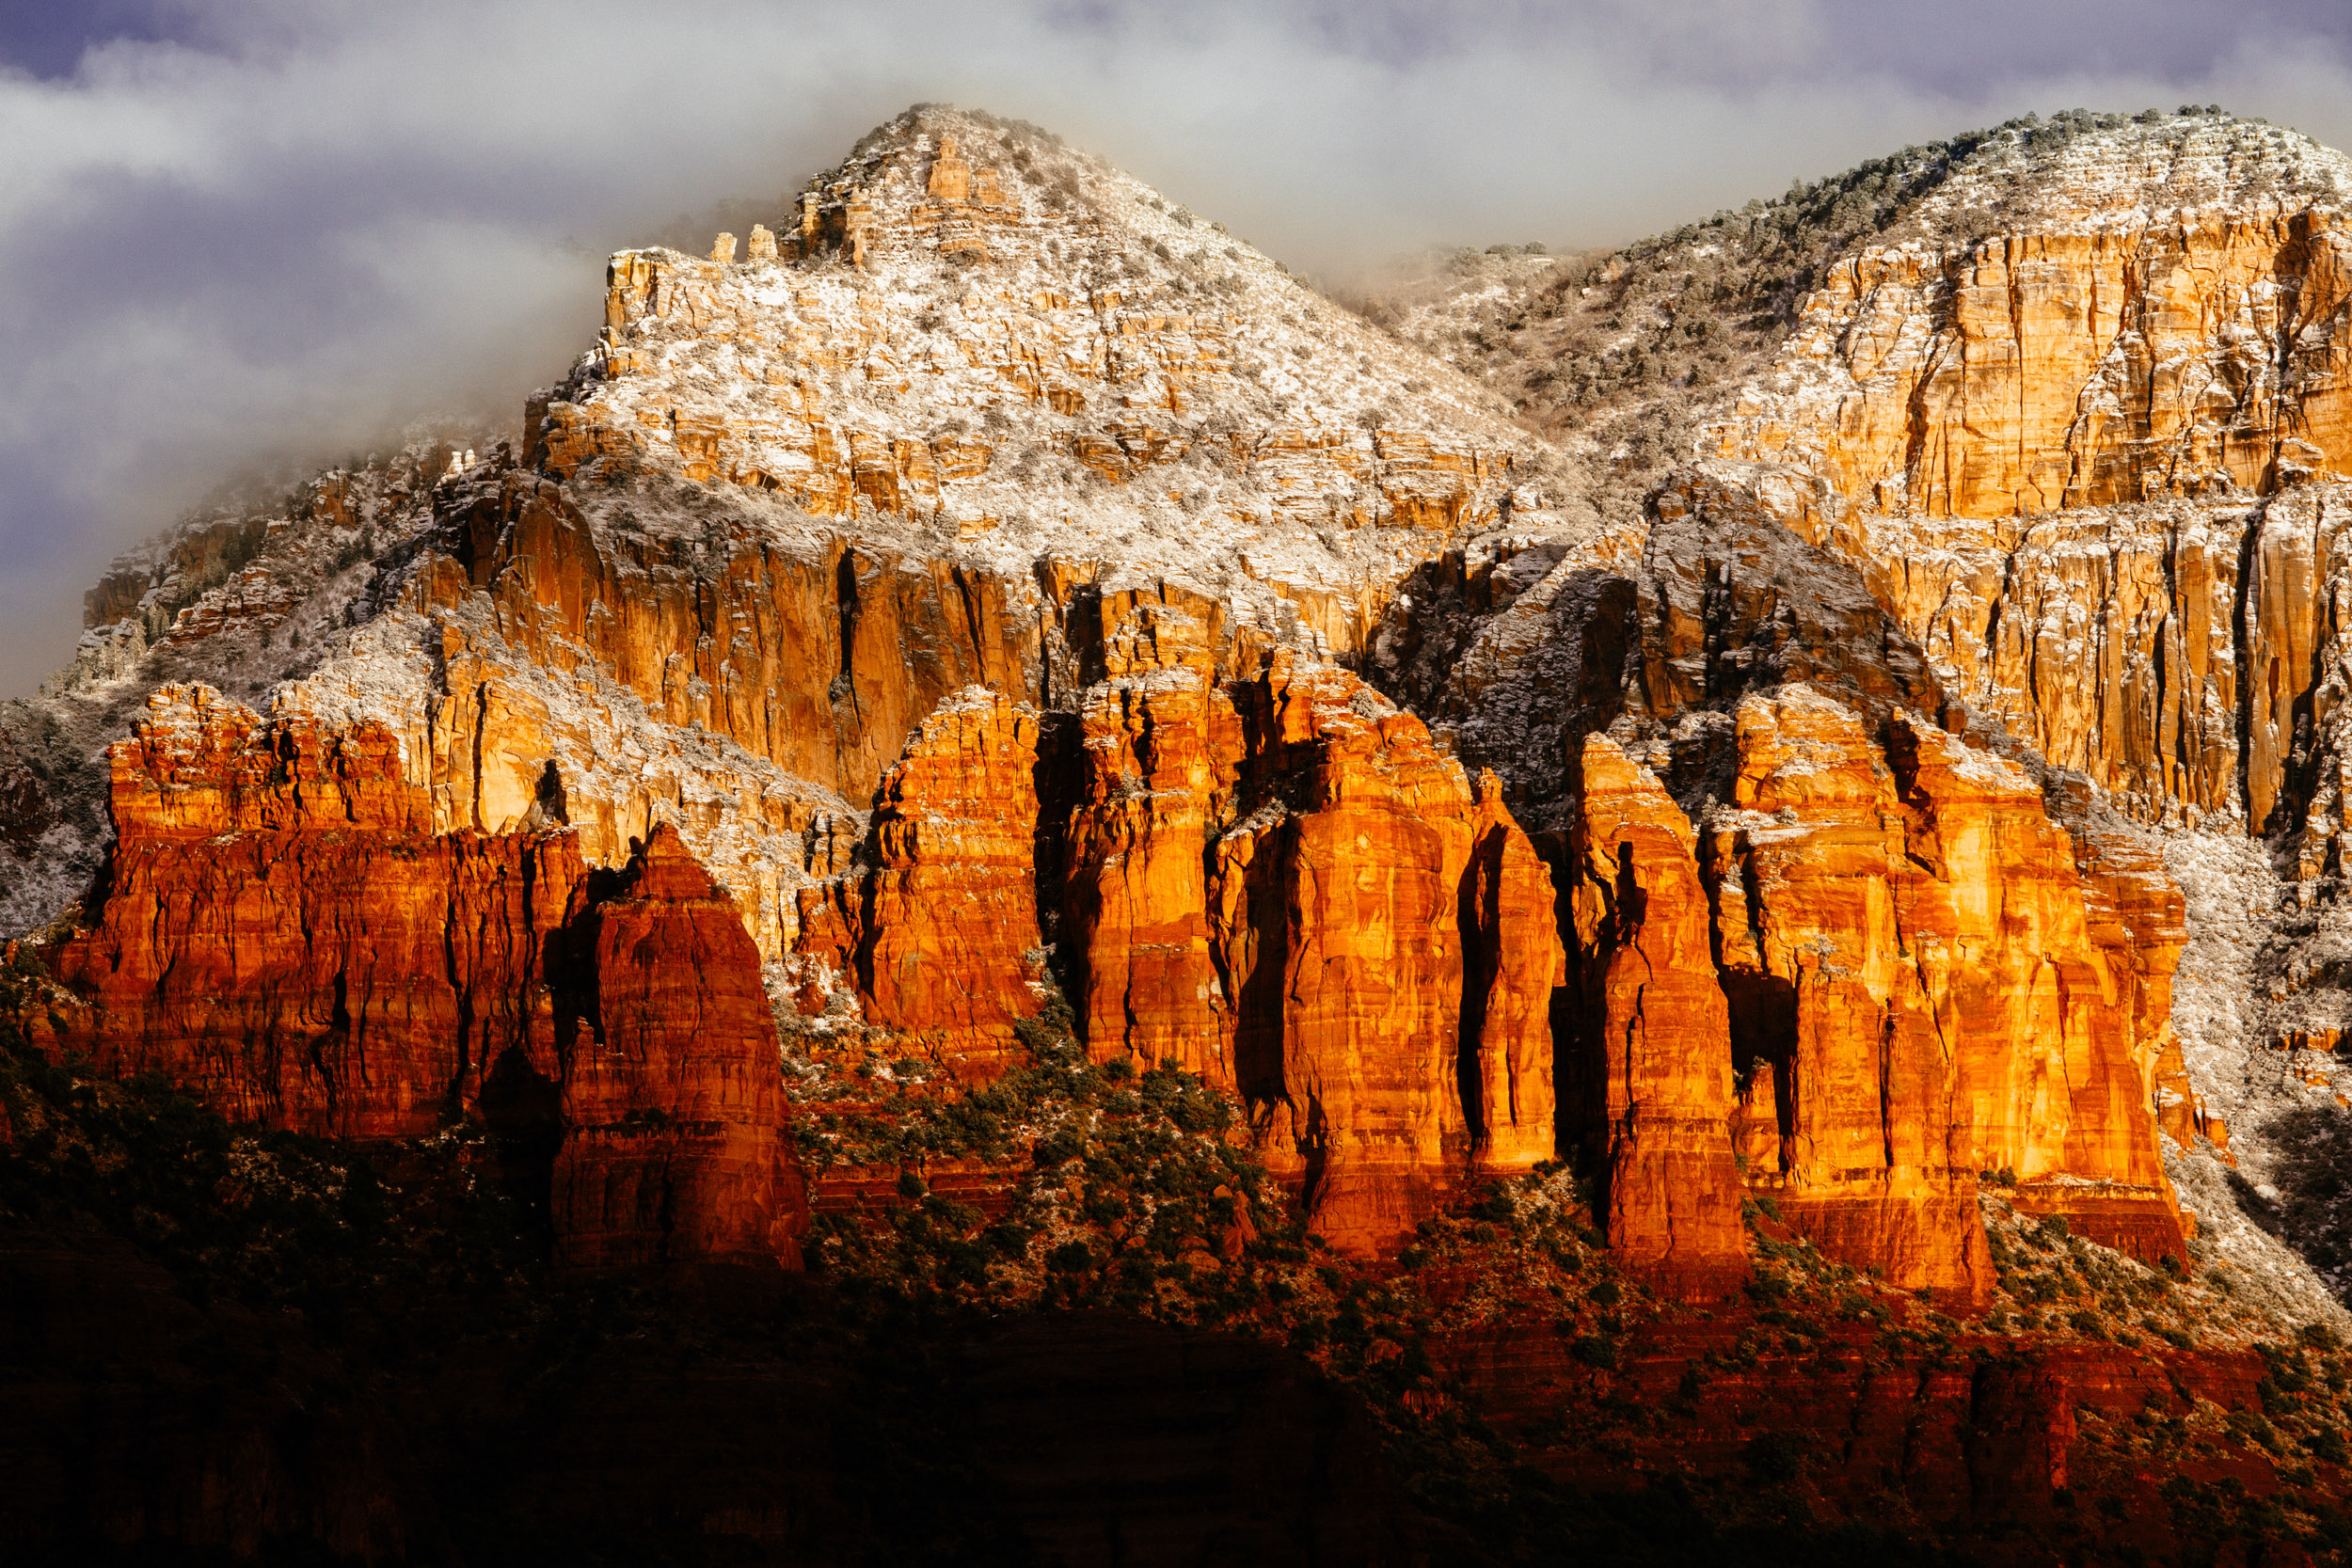 The sun peeks through parting clouds following a snowstorm, lighting up Sedona’s red rocks